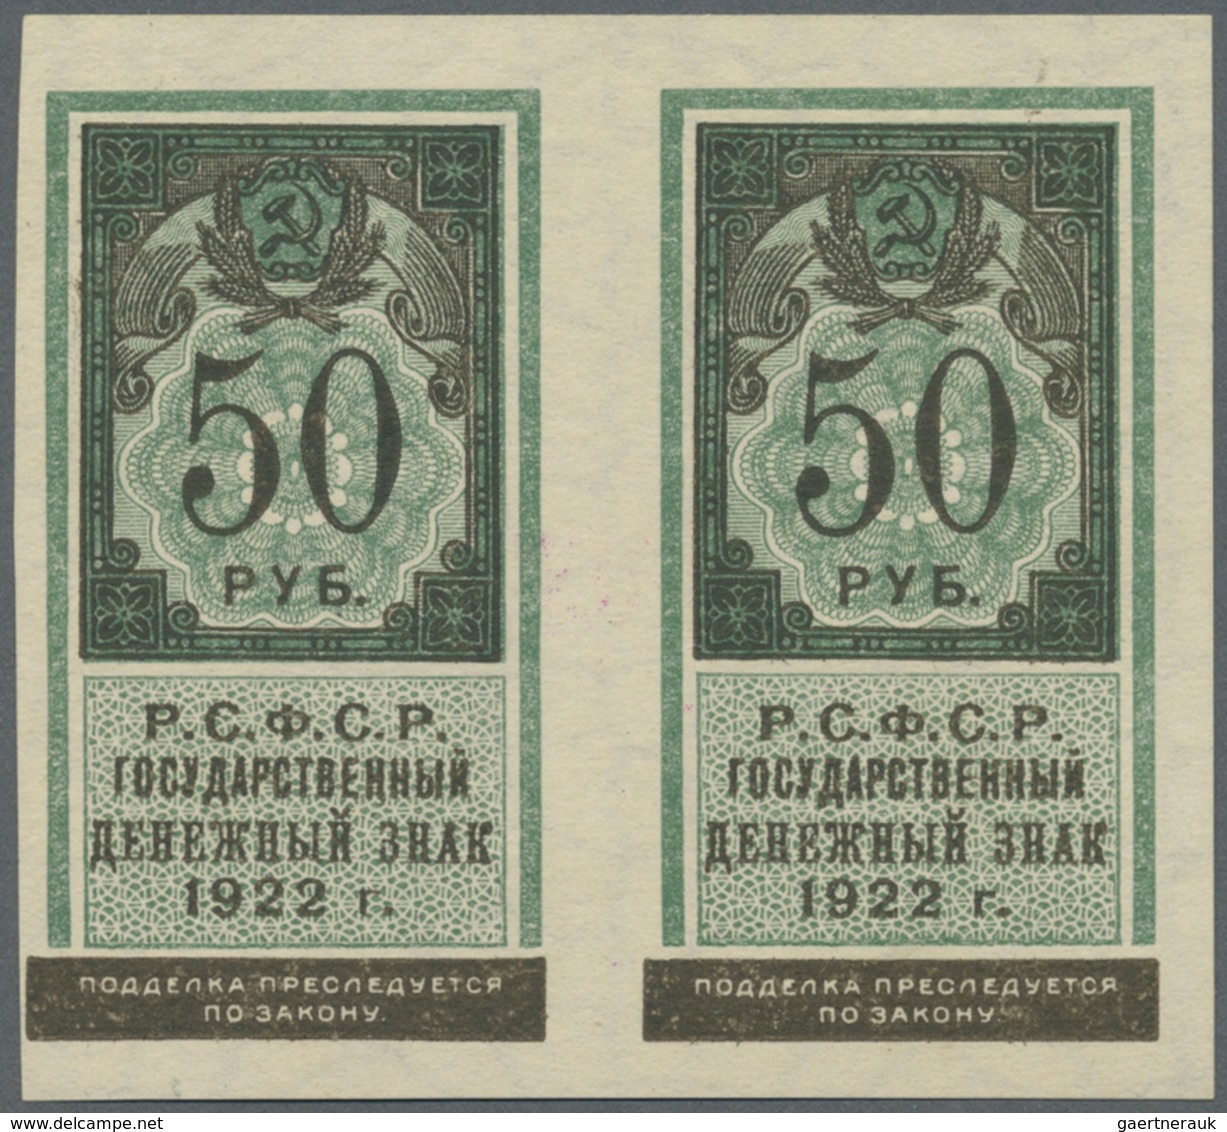 Russia / Russland: 2 Uncut Notes Of 50 Rubles 1922 P. 151 In Condition: UNC. - Russia